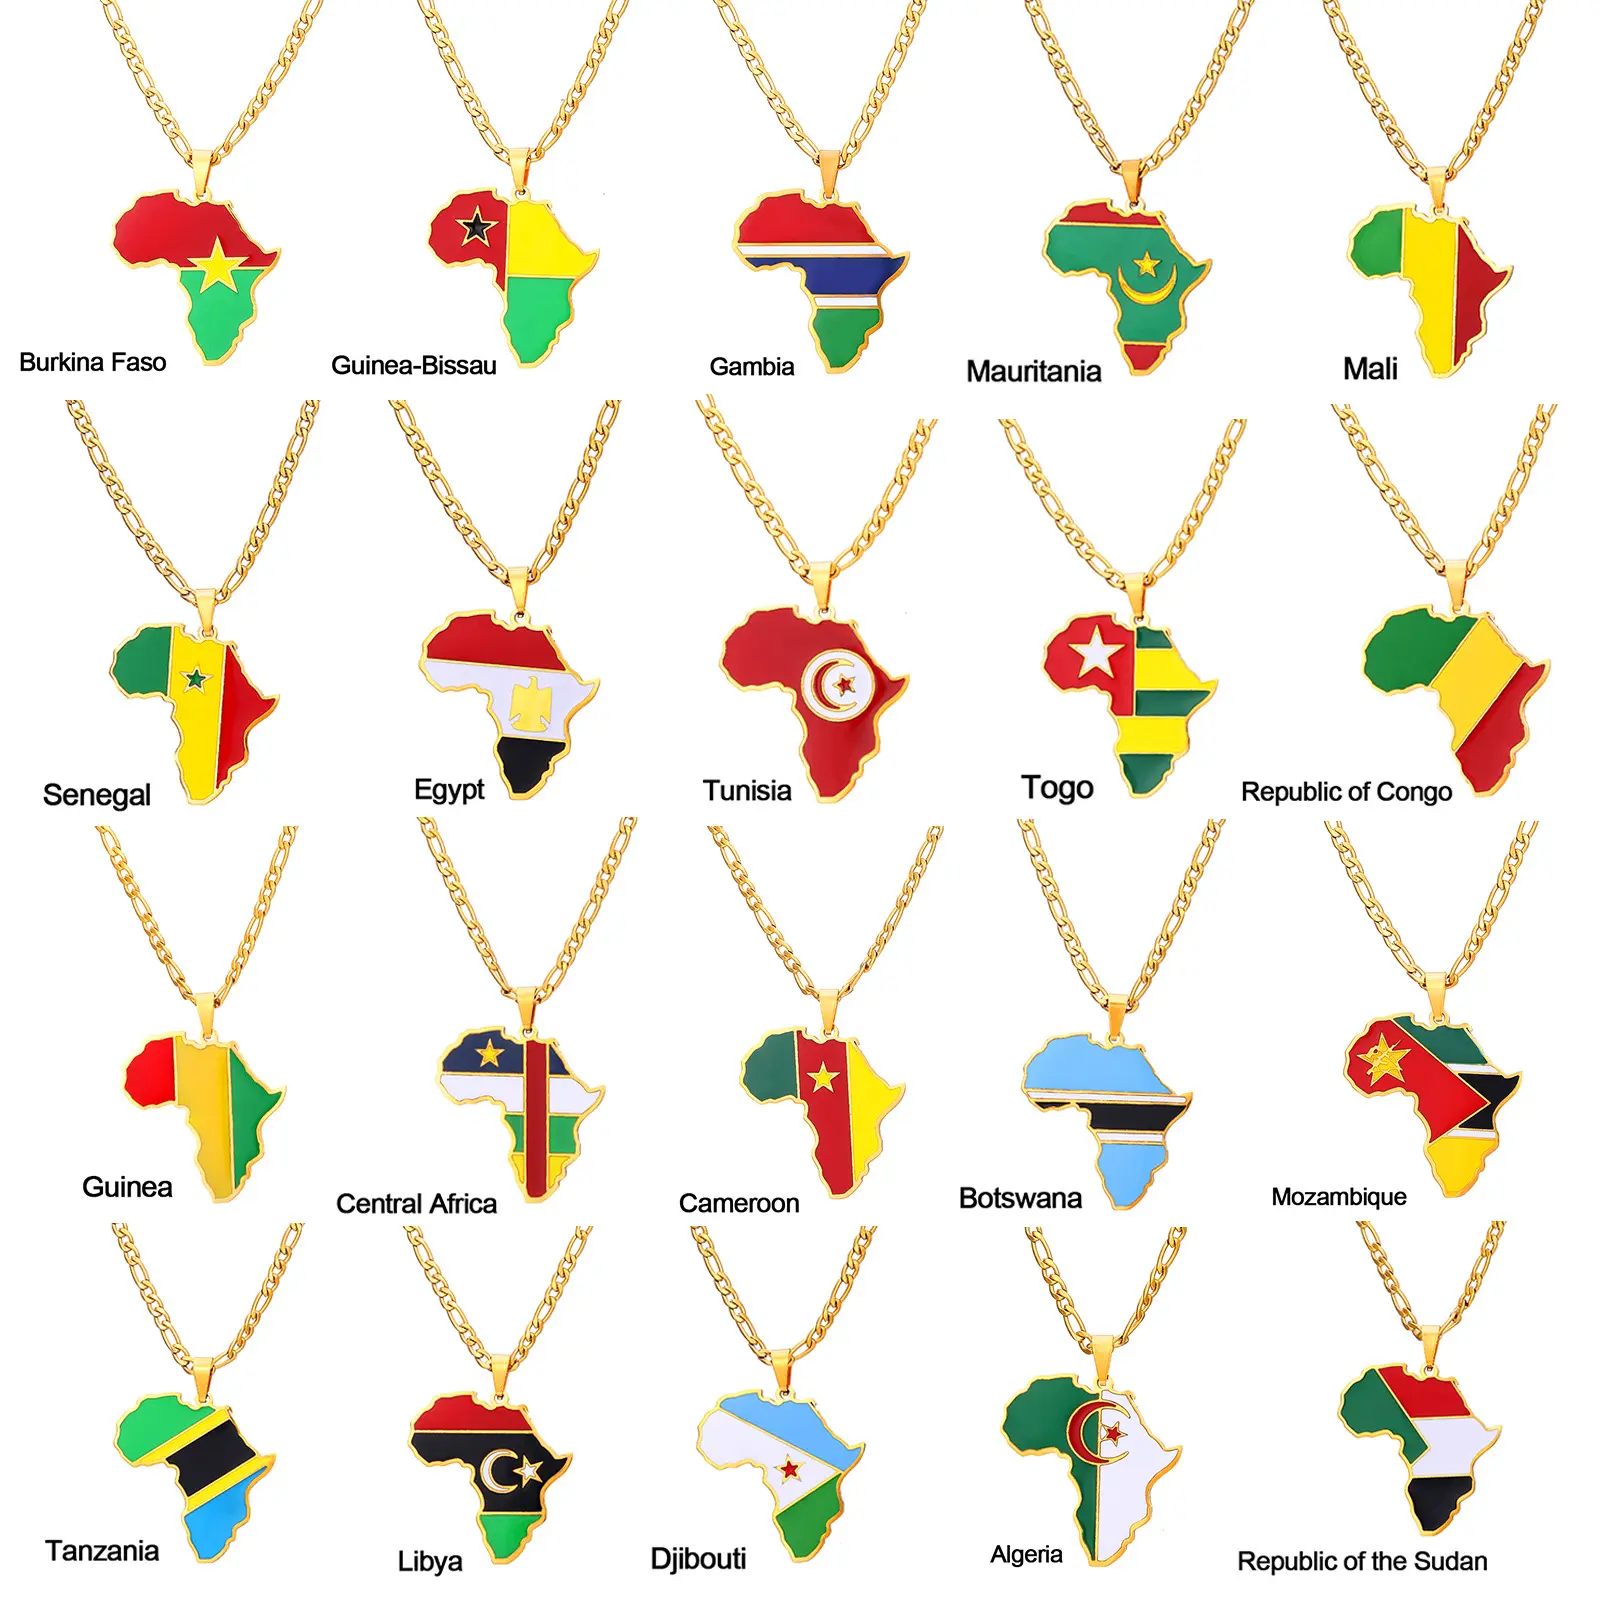 Africa Map Flag Pendant Necklace Gold Color Stainless Steel Ghana Nigeria Congo Somalia Angola Liberia African Jewelry Gift